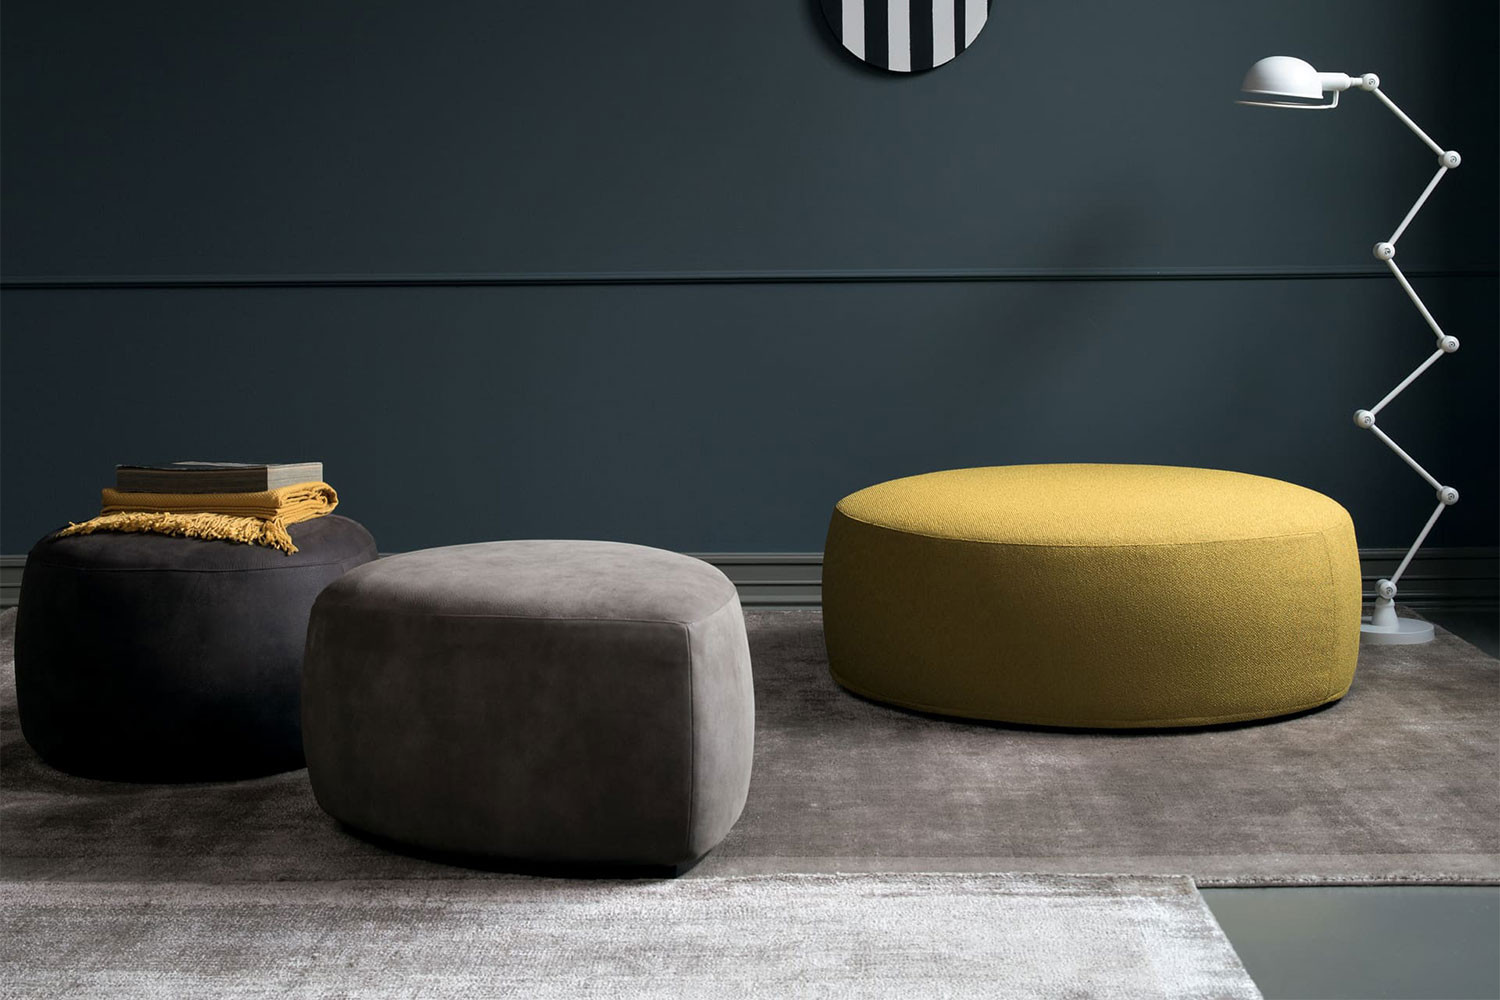 Contemporary, minimalist upholstered pouffes with a low wooden plinth base